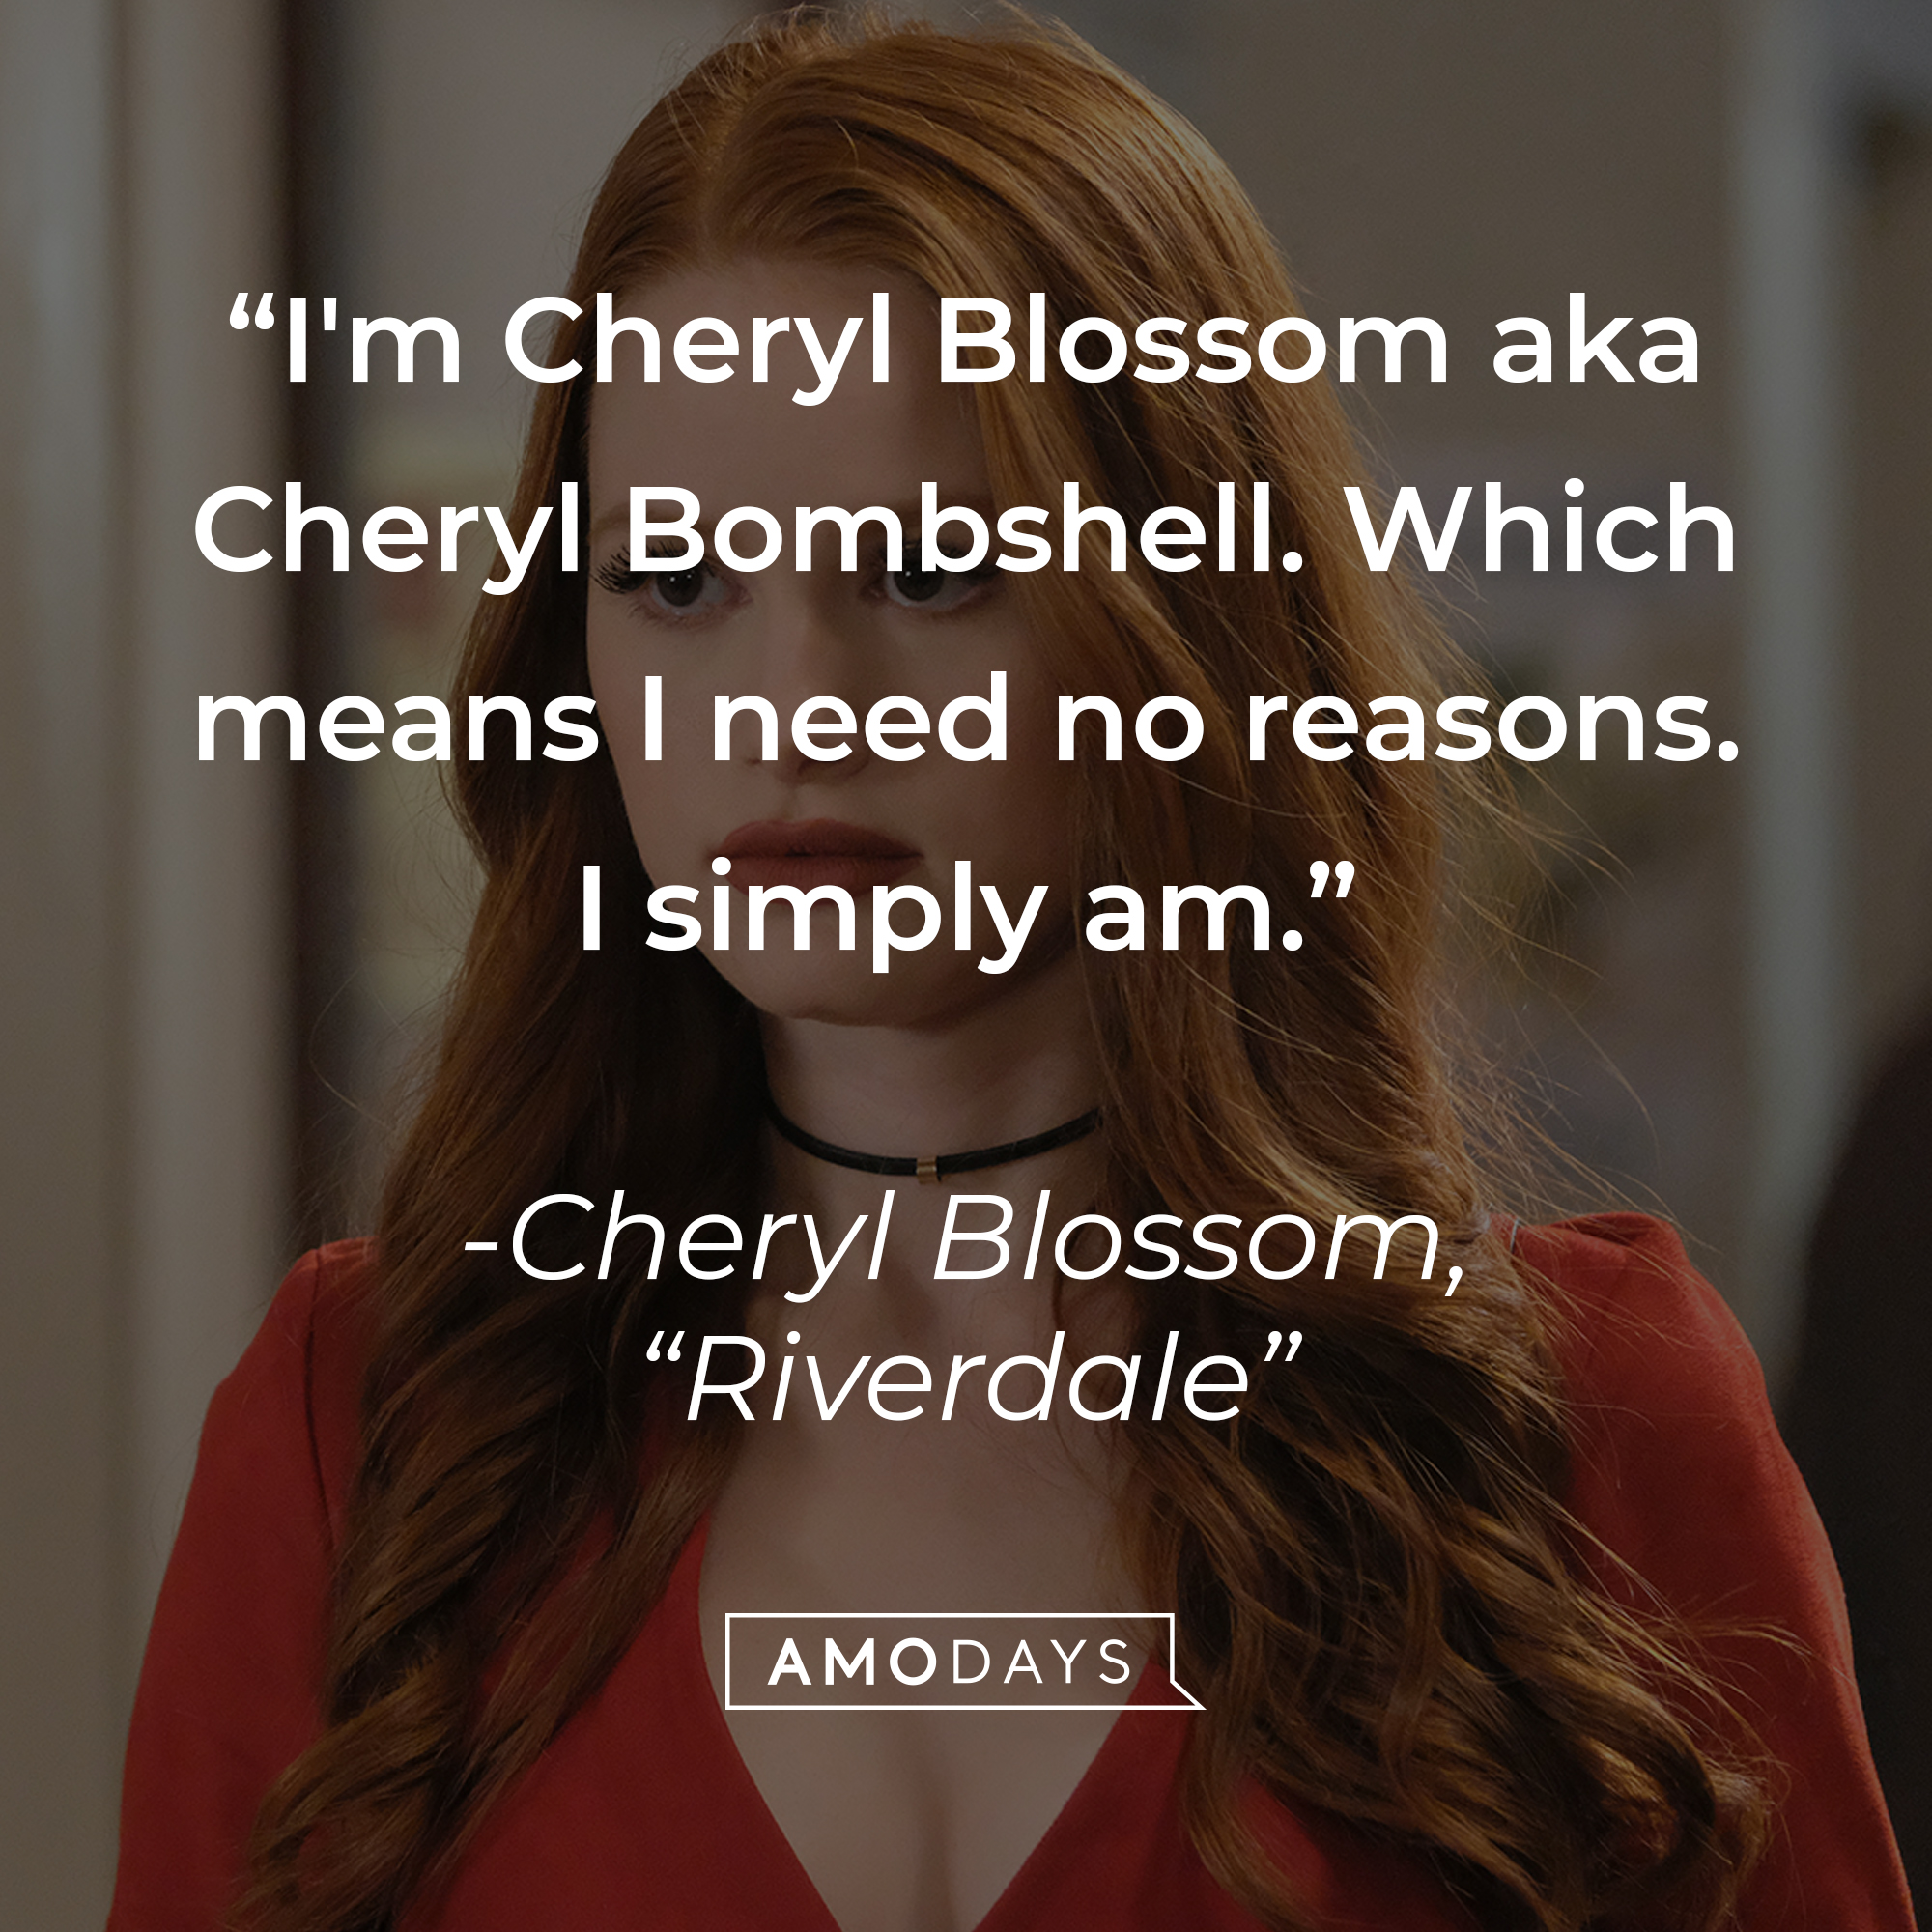 Cheryl Blossom with her quote: "I'm Cheryl Blossom aka Cheryl Bombshell. Which means I need no reasons. I simply am." | Source: Facebook.com/CWRiverdale